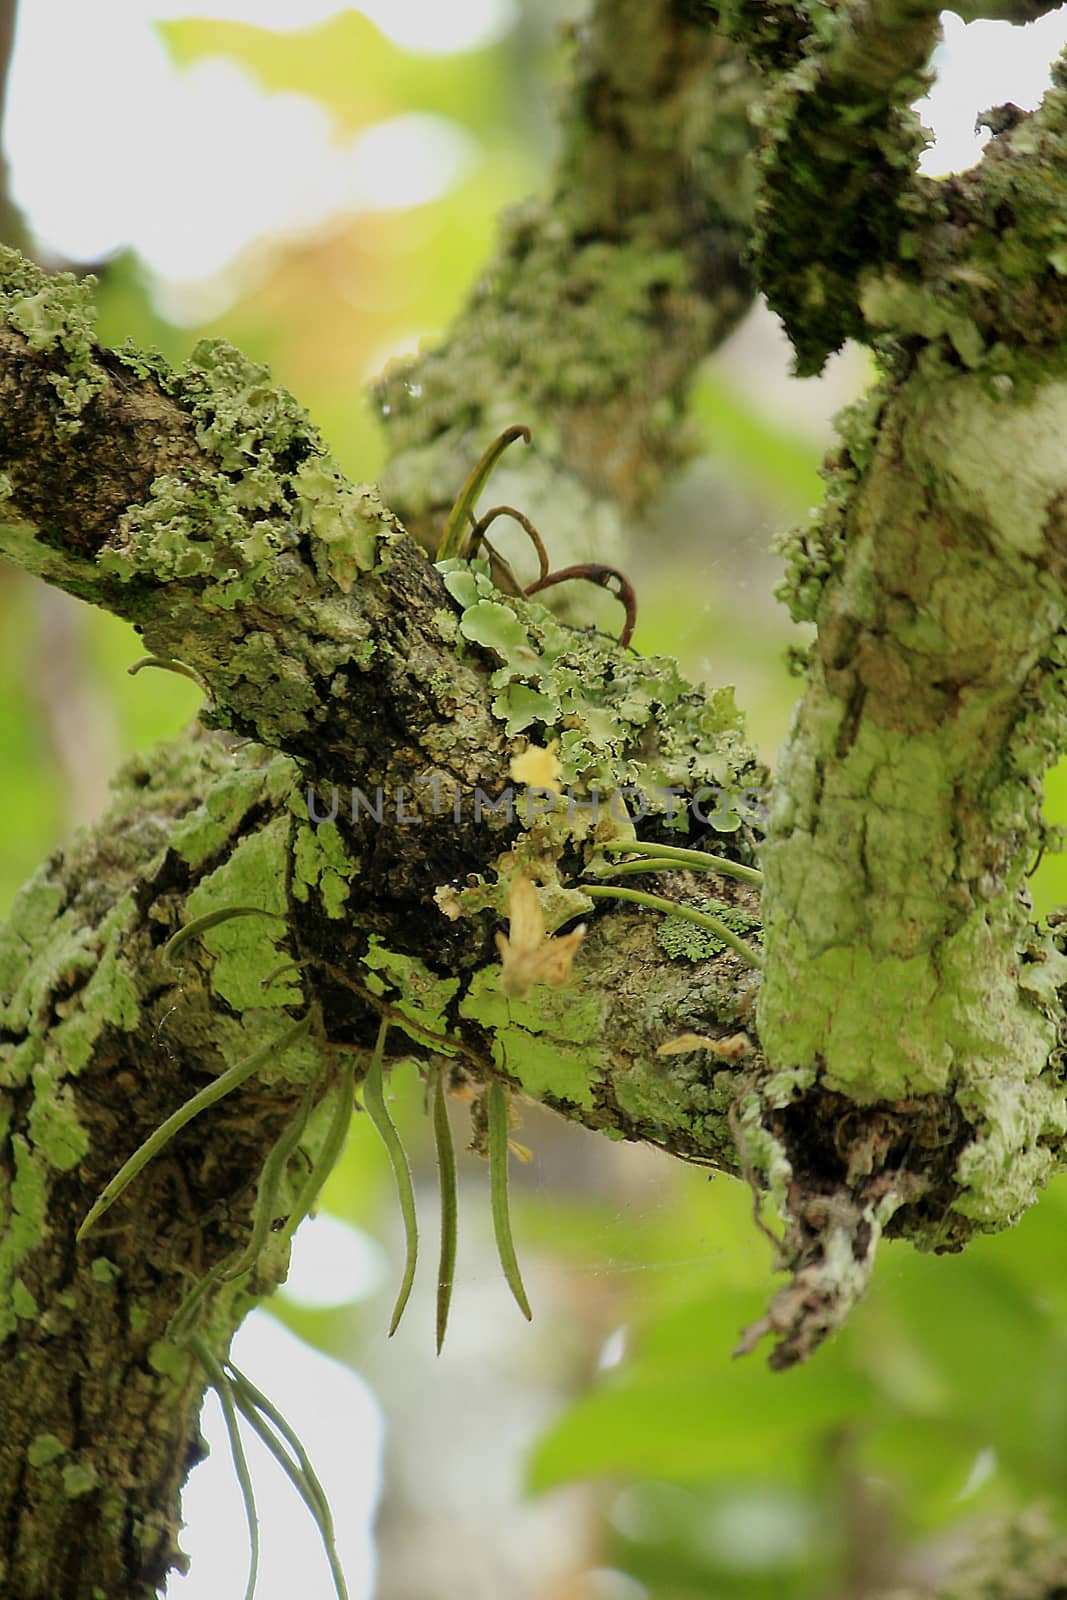 Lichens on the branches by Puripatt